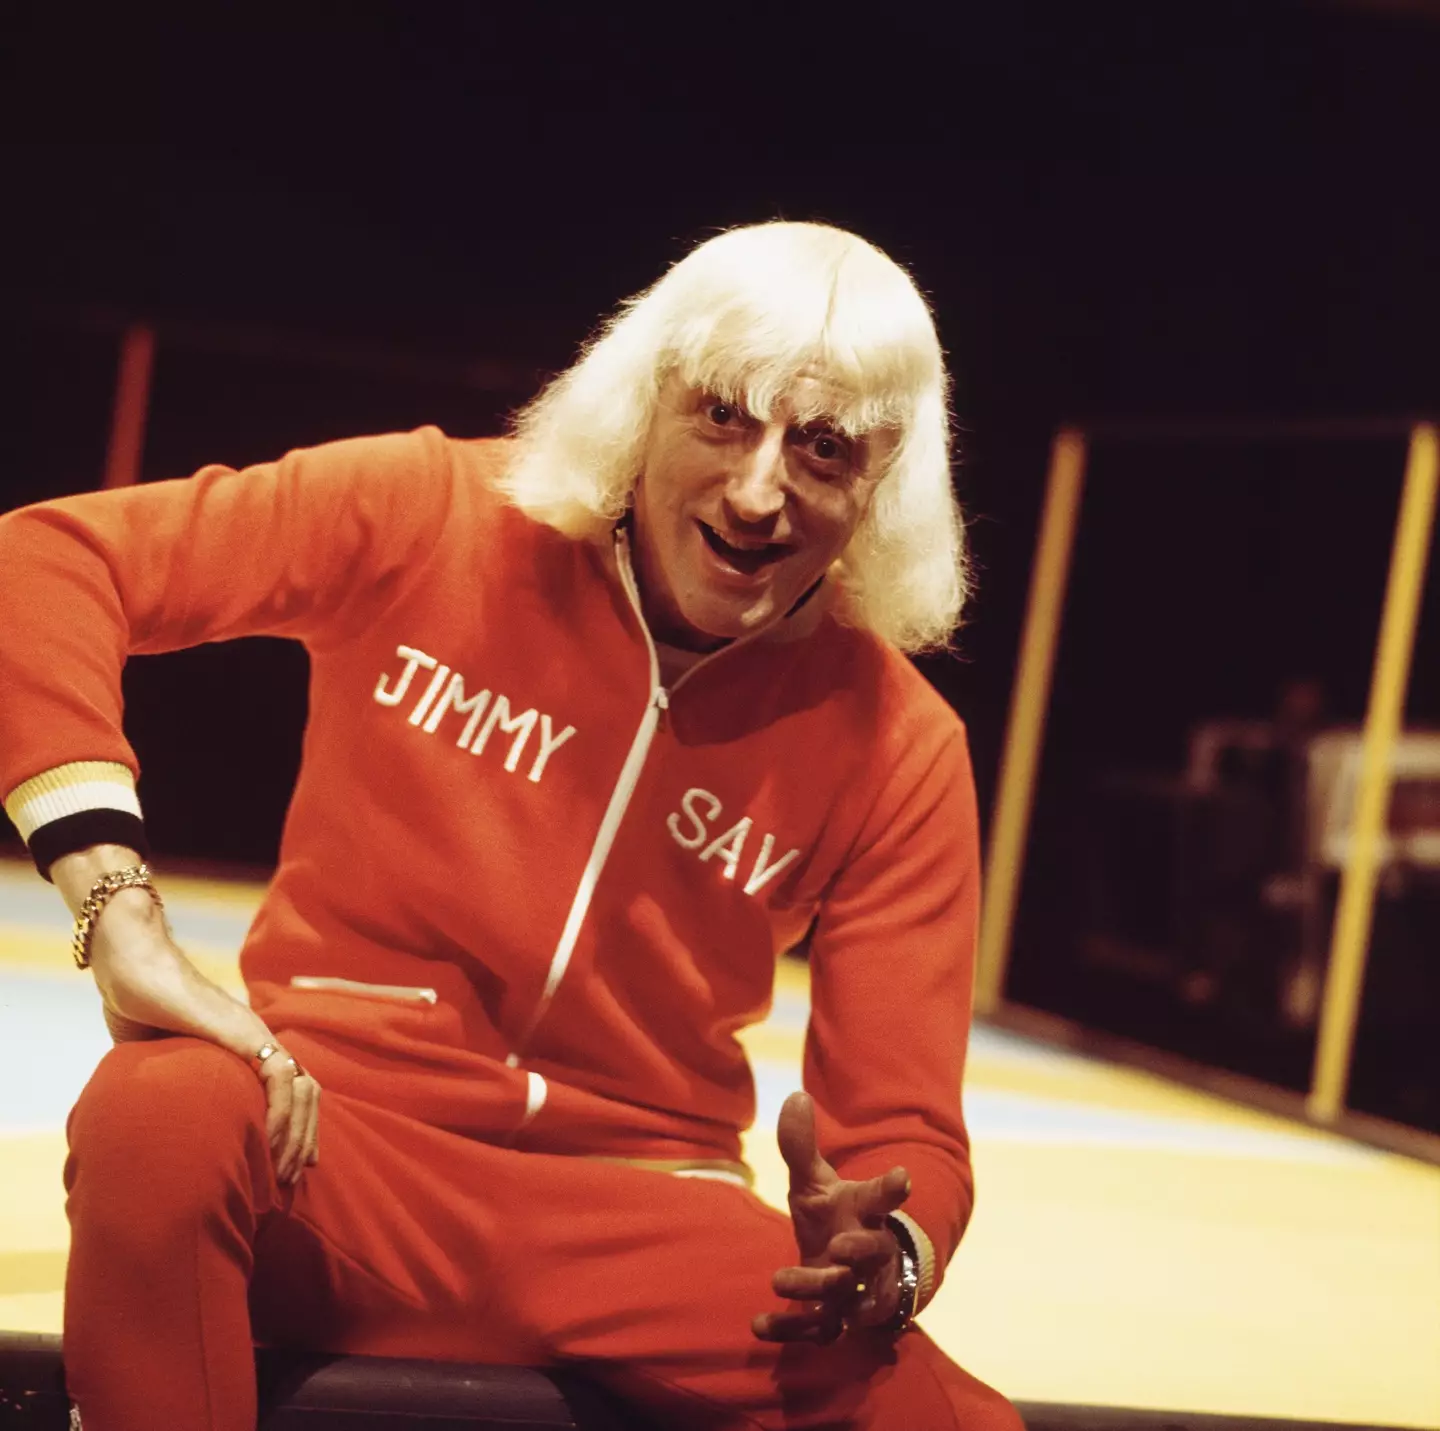 After his death, Jimmy Savile was revealed to have been a paedophile and serial abuser with horrific crimes spanning decades.